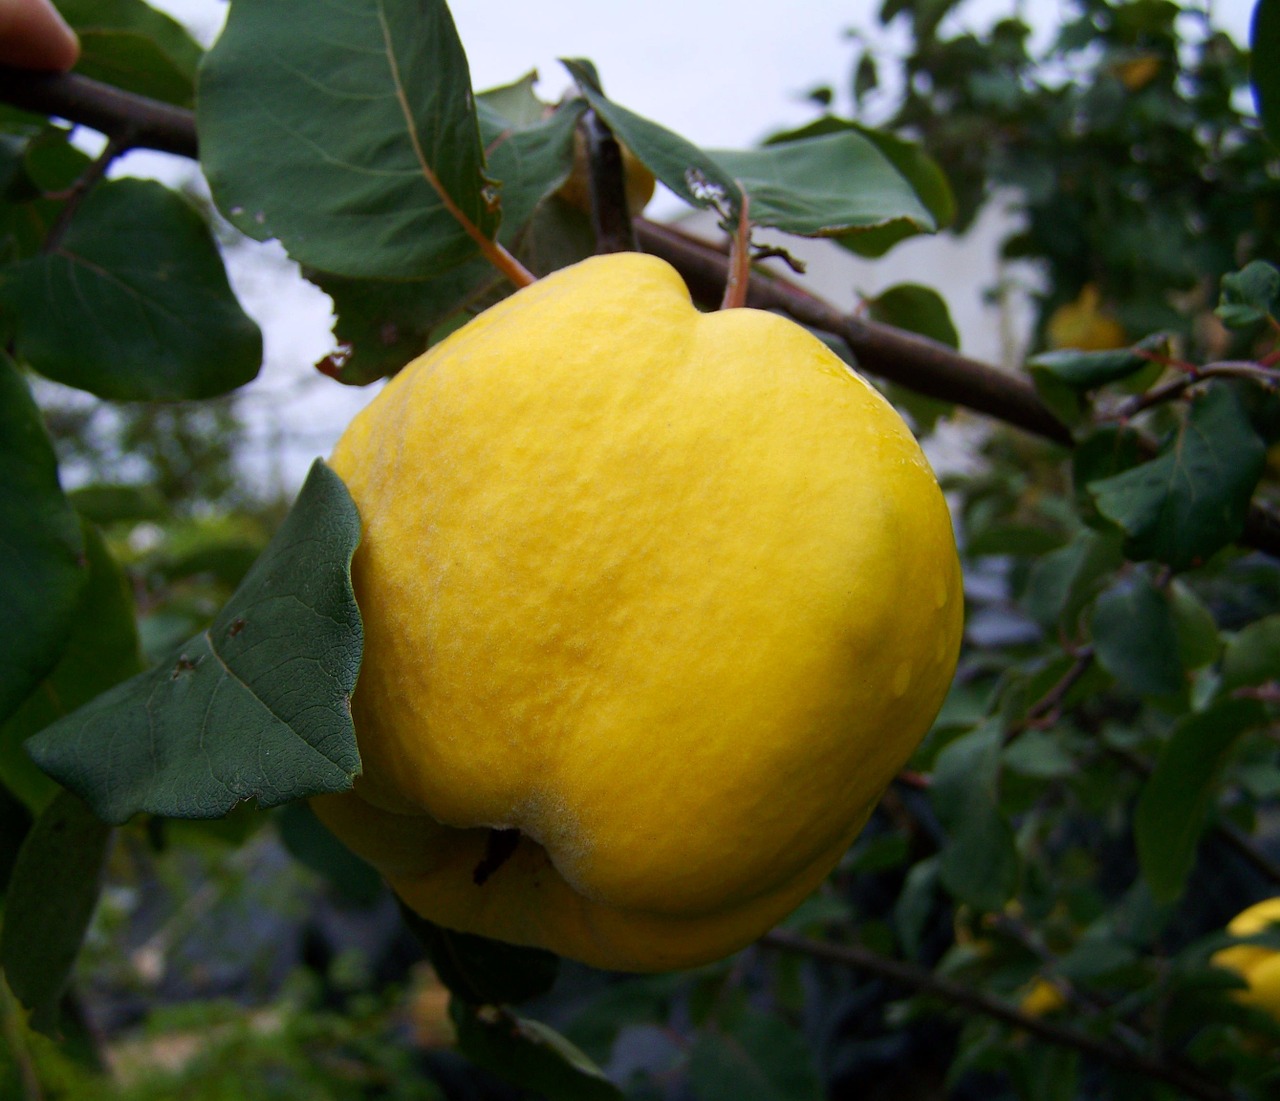 quince yellow fruit mature free photo